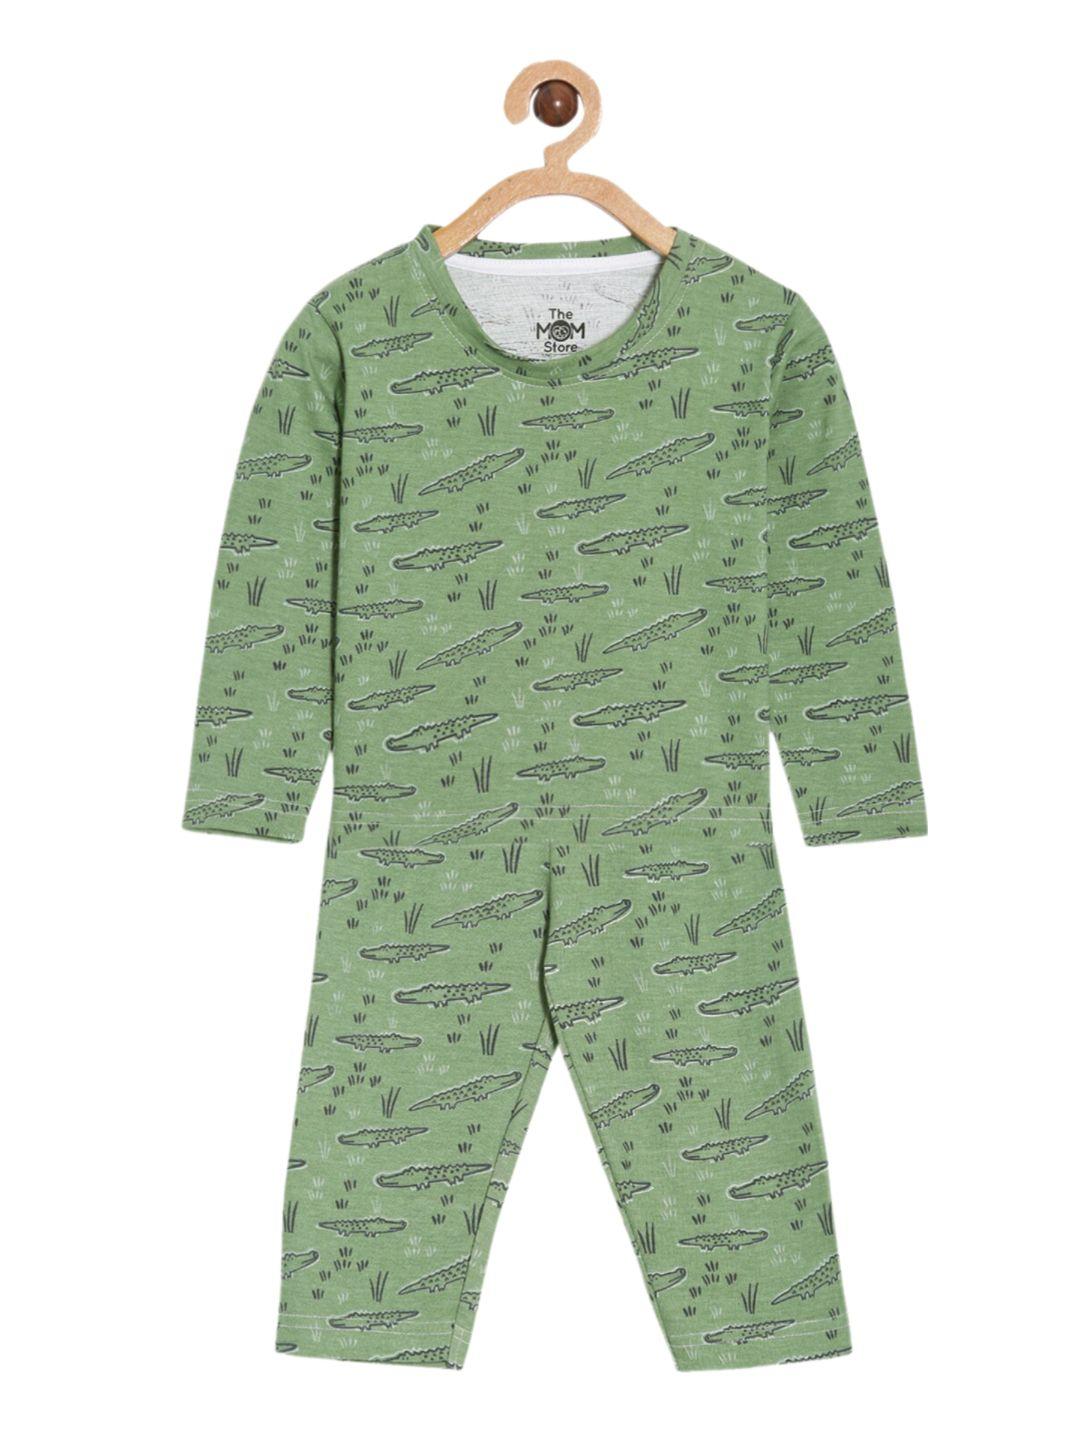 the mom store kids conversational printed pure cotton night suit